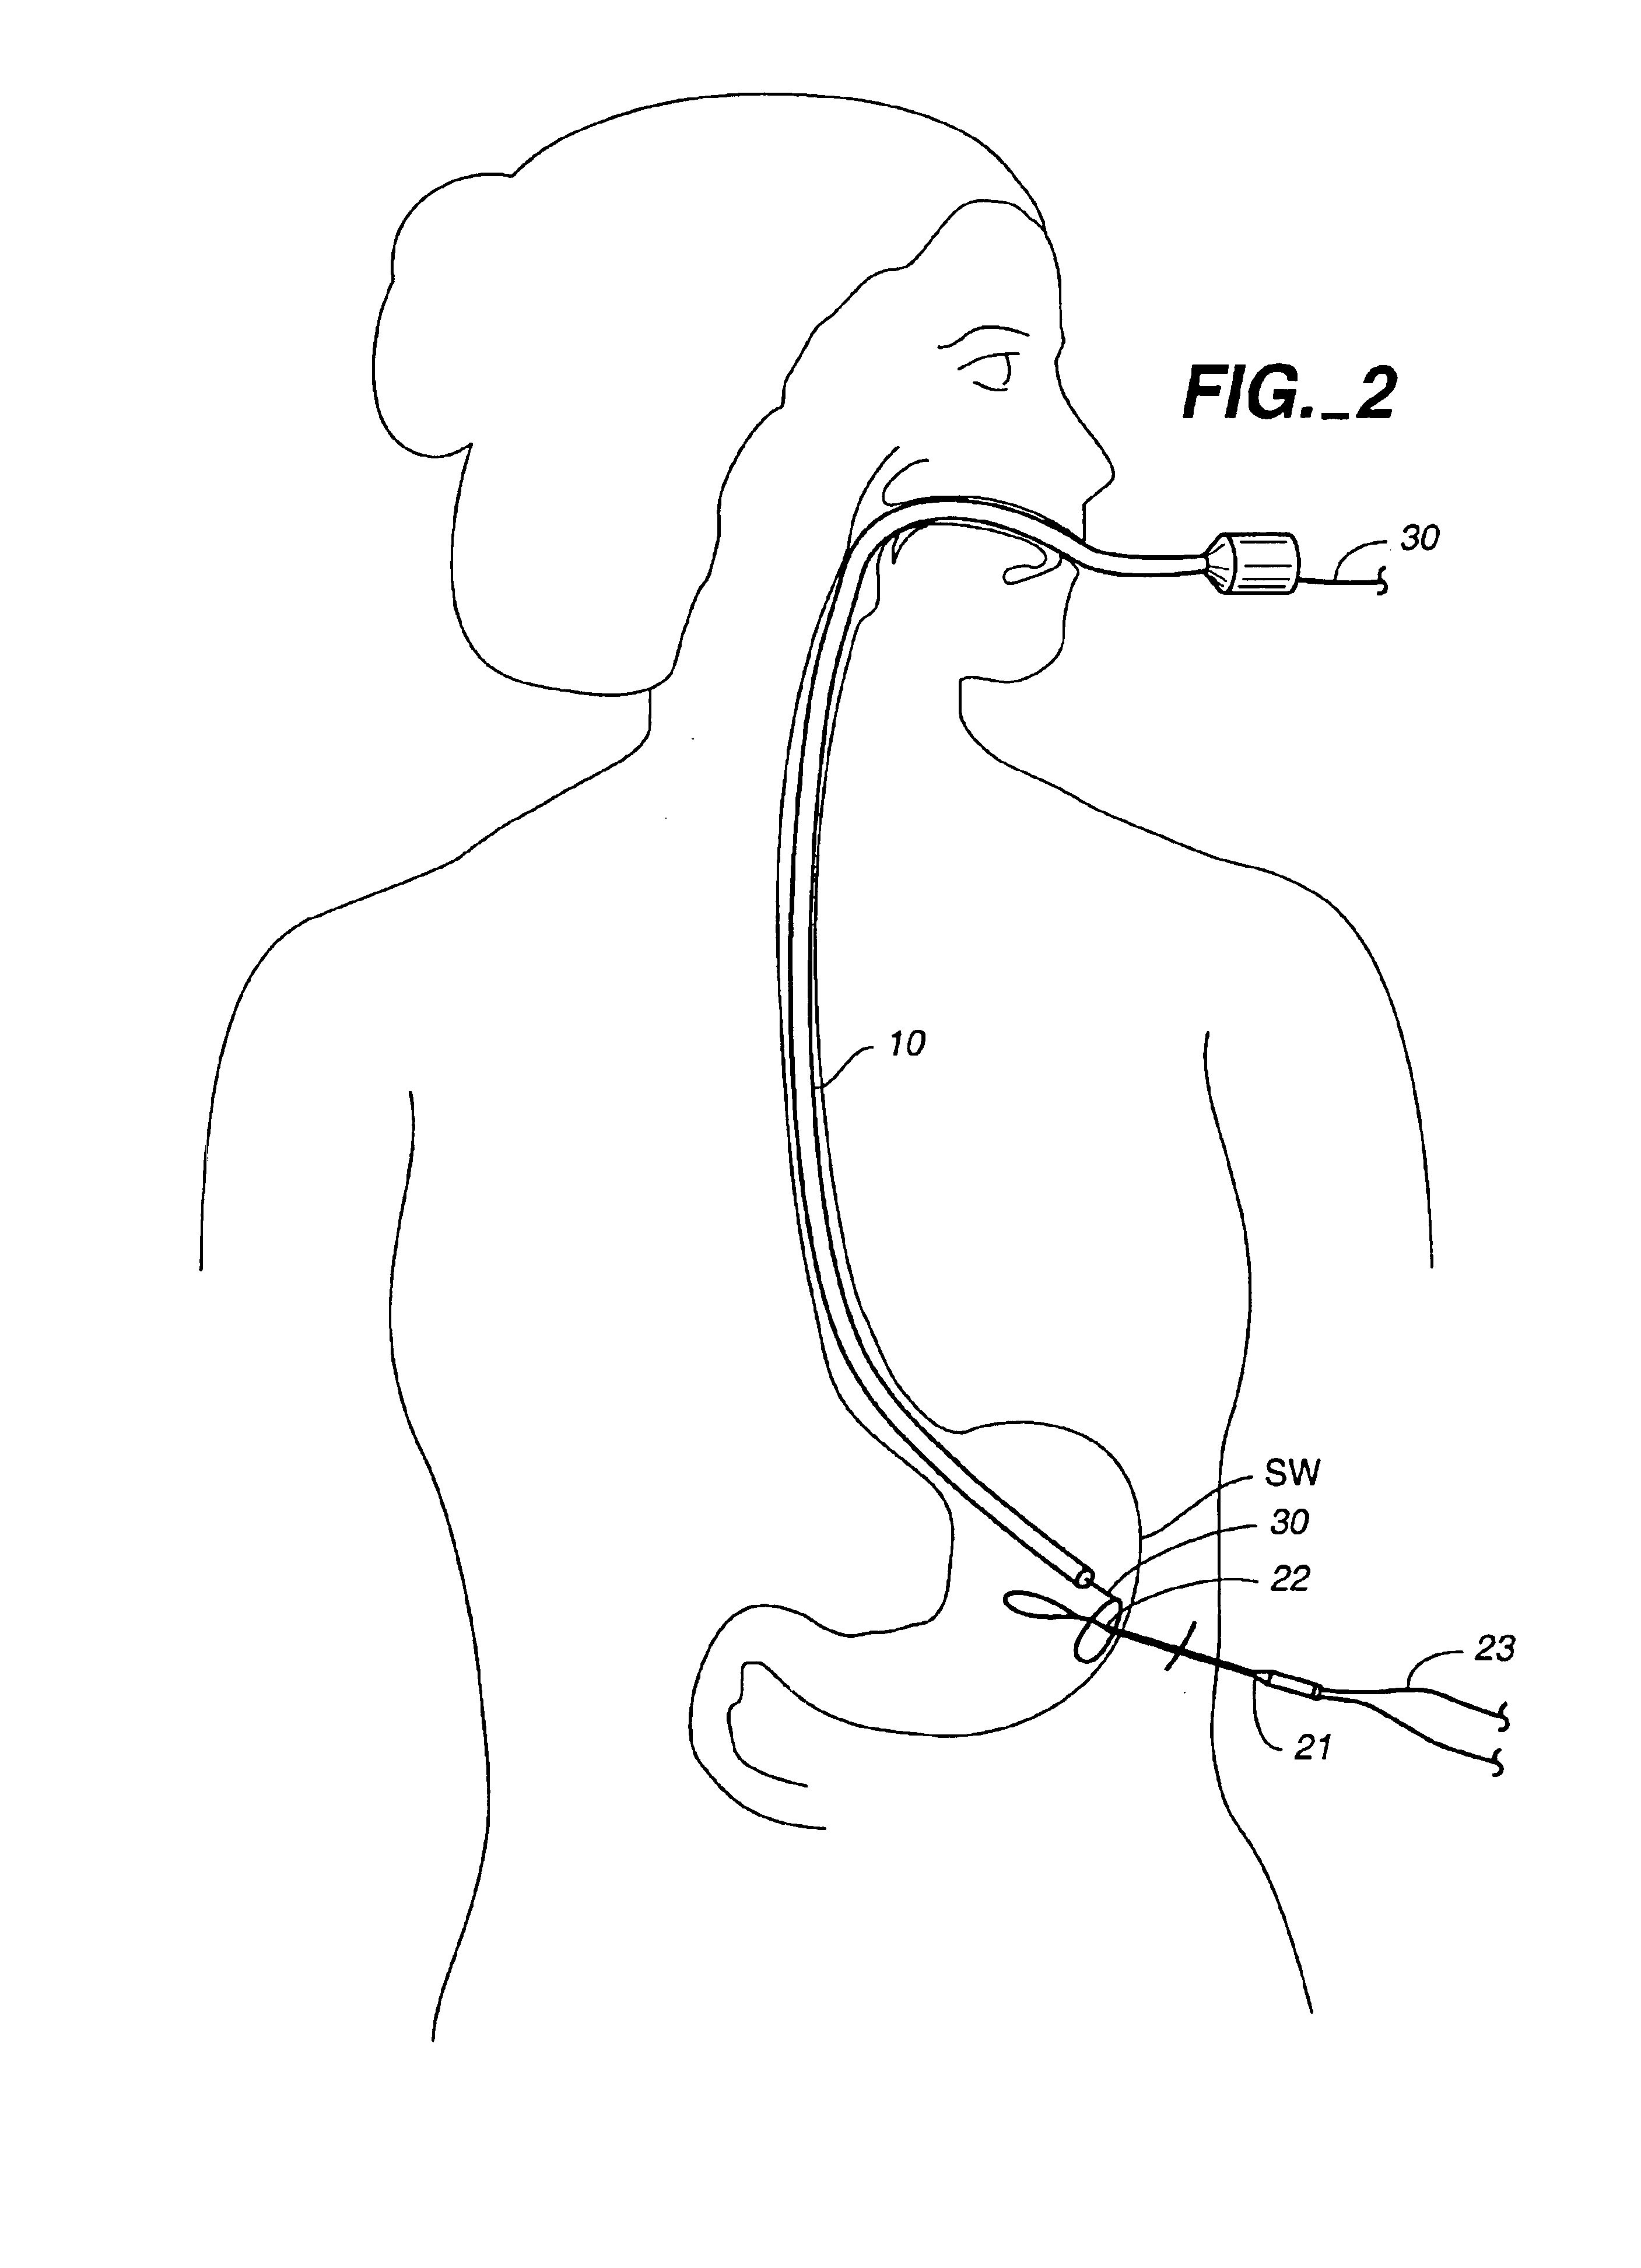 Method and device for use in minimally invasive placement of space-occupying intragastric devices